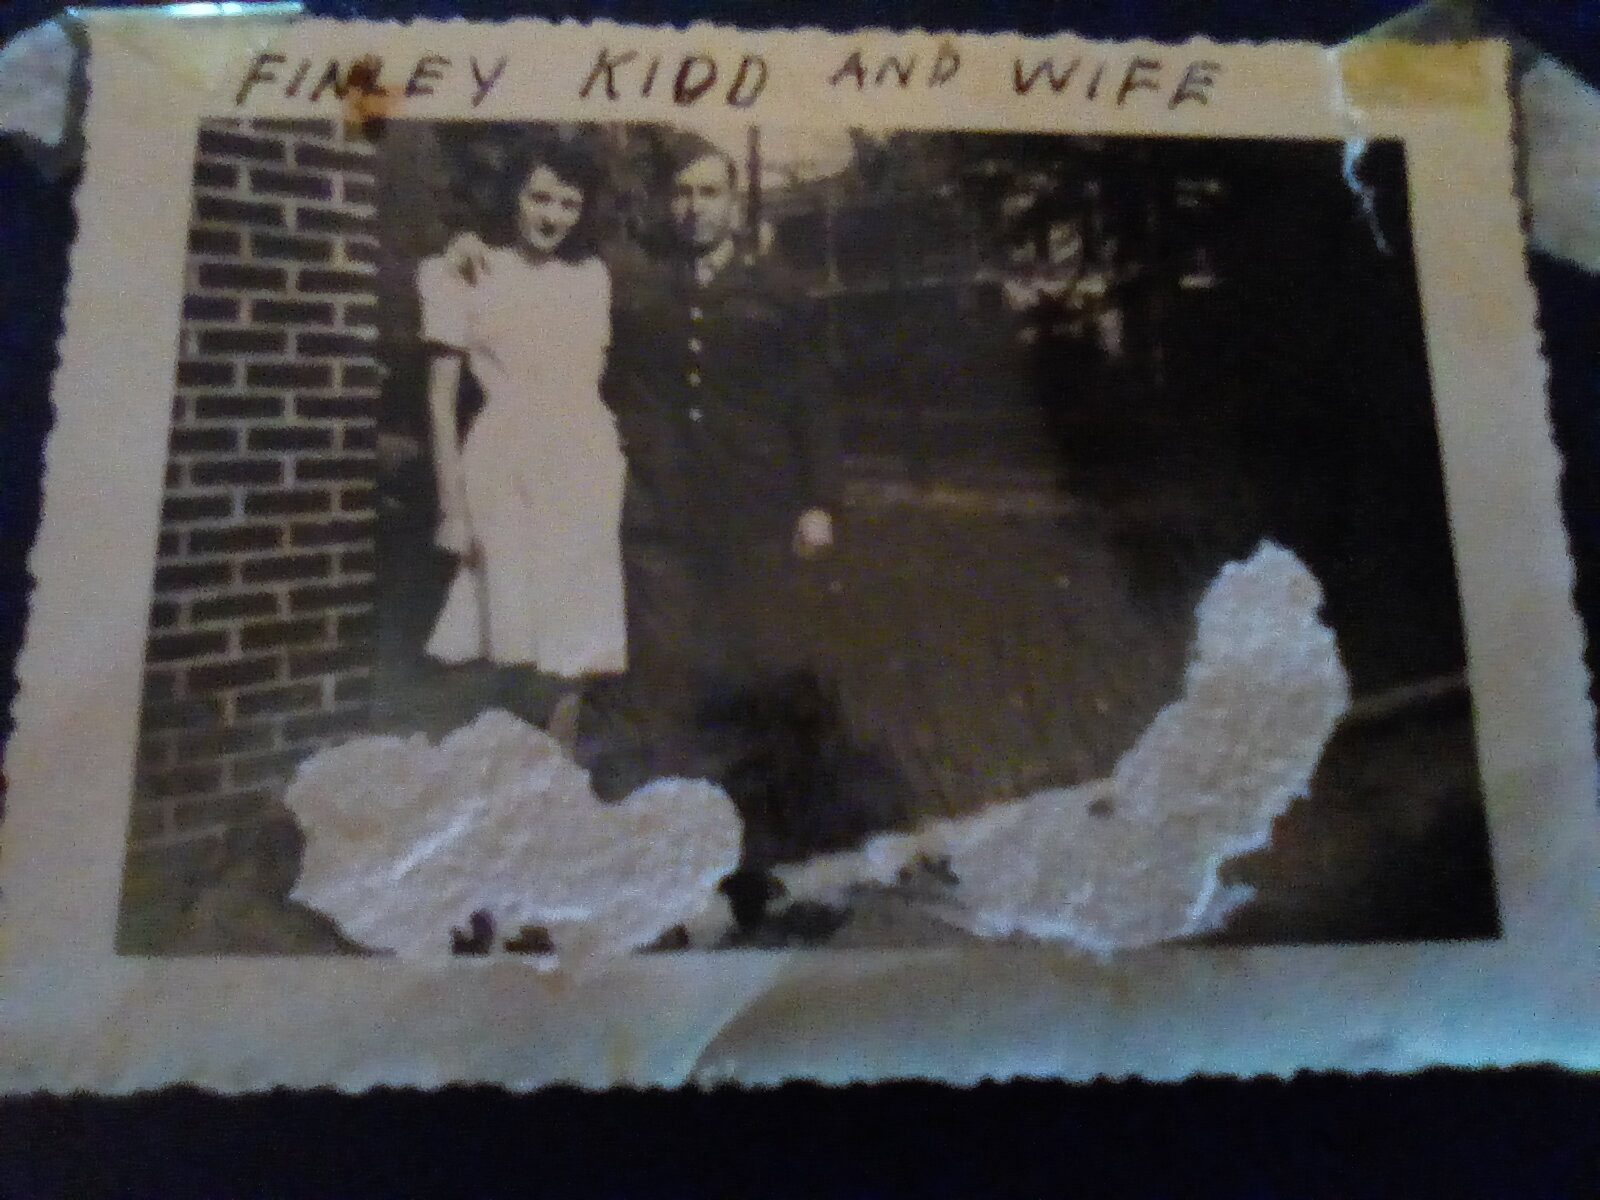 Finley Kidd and wife